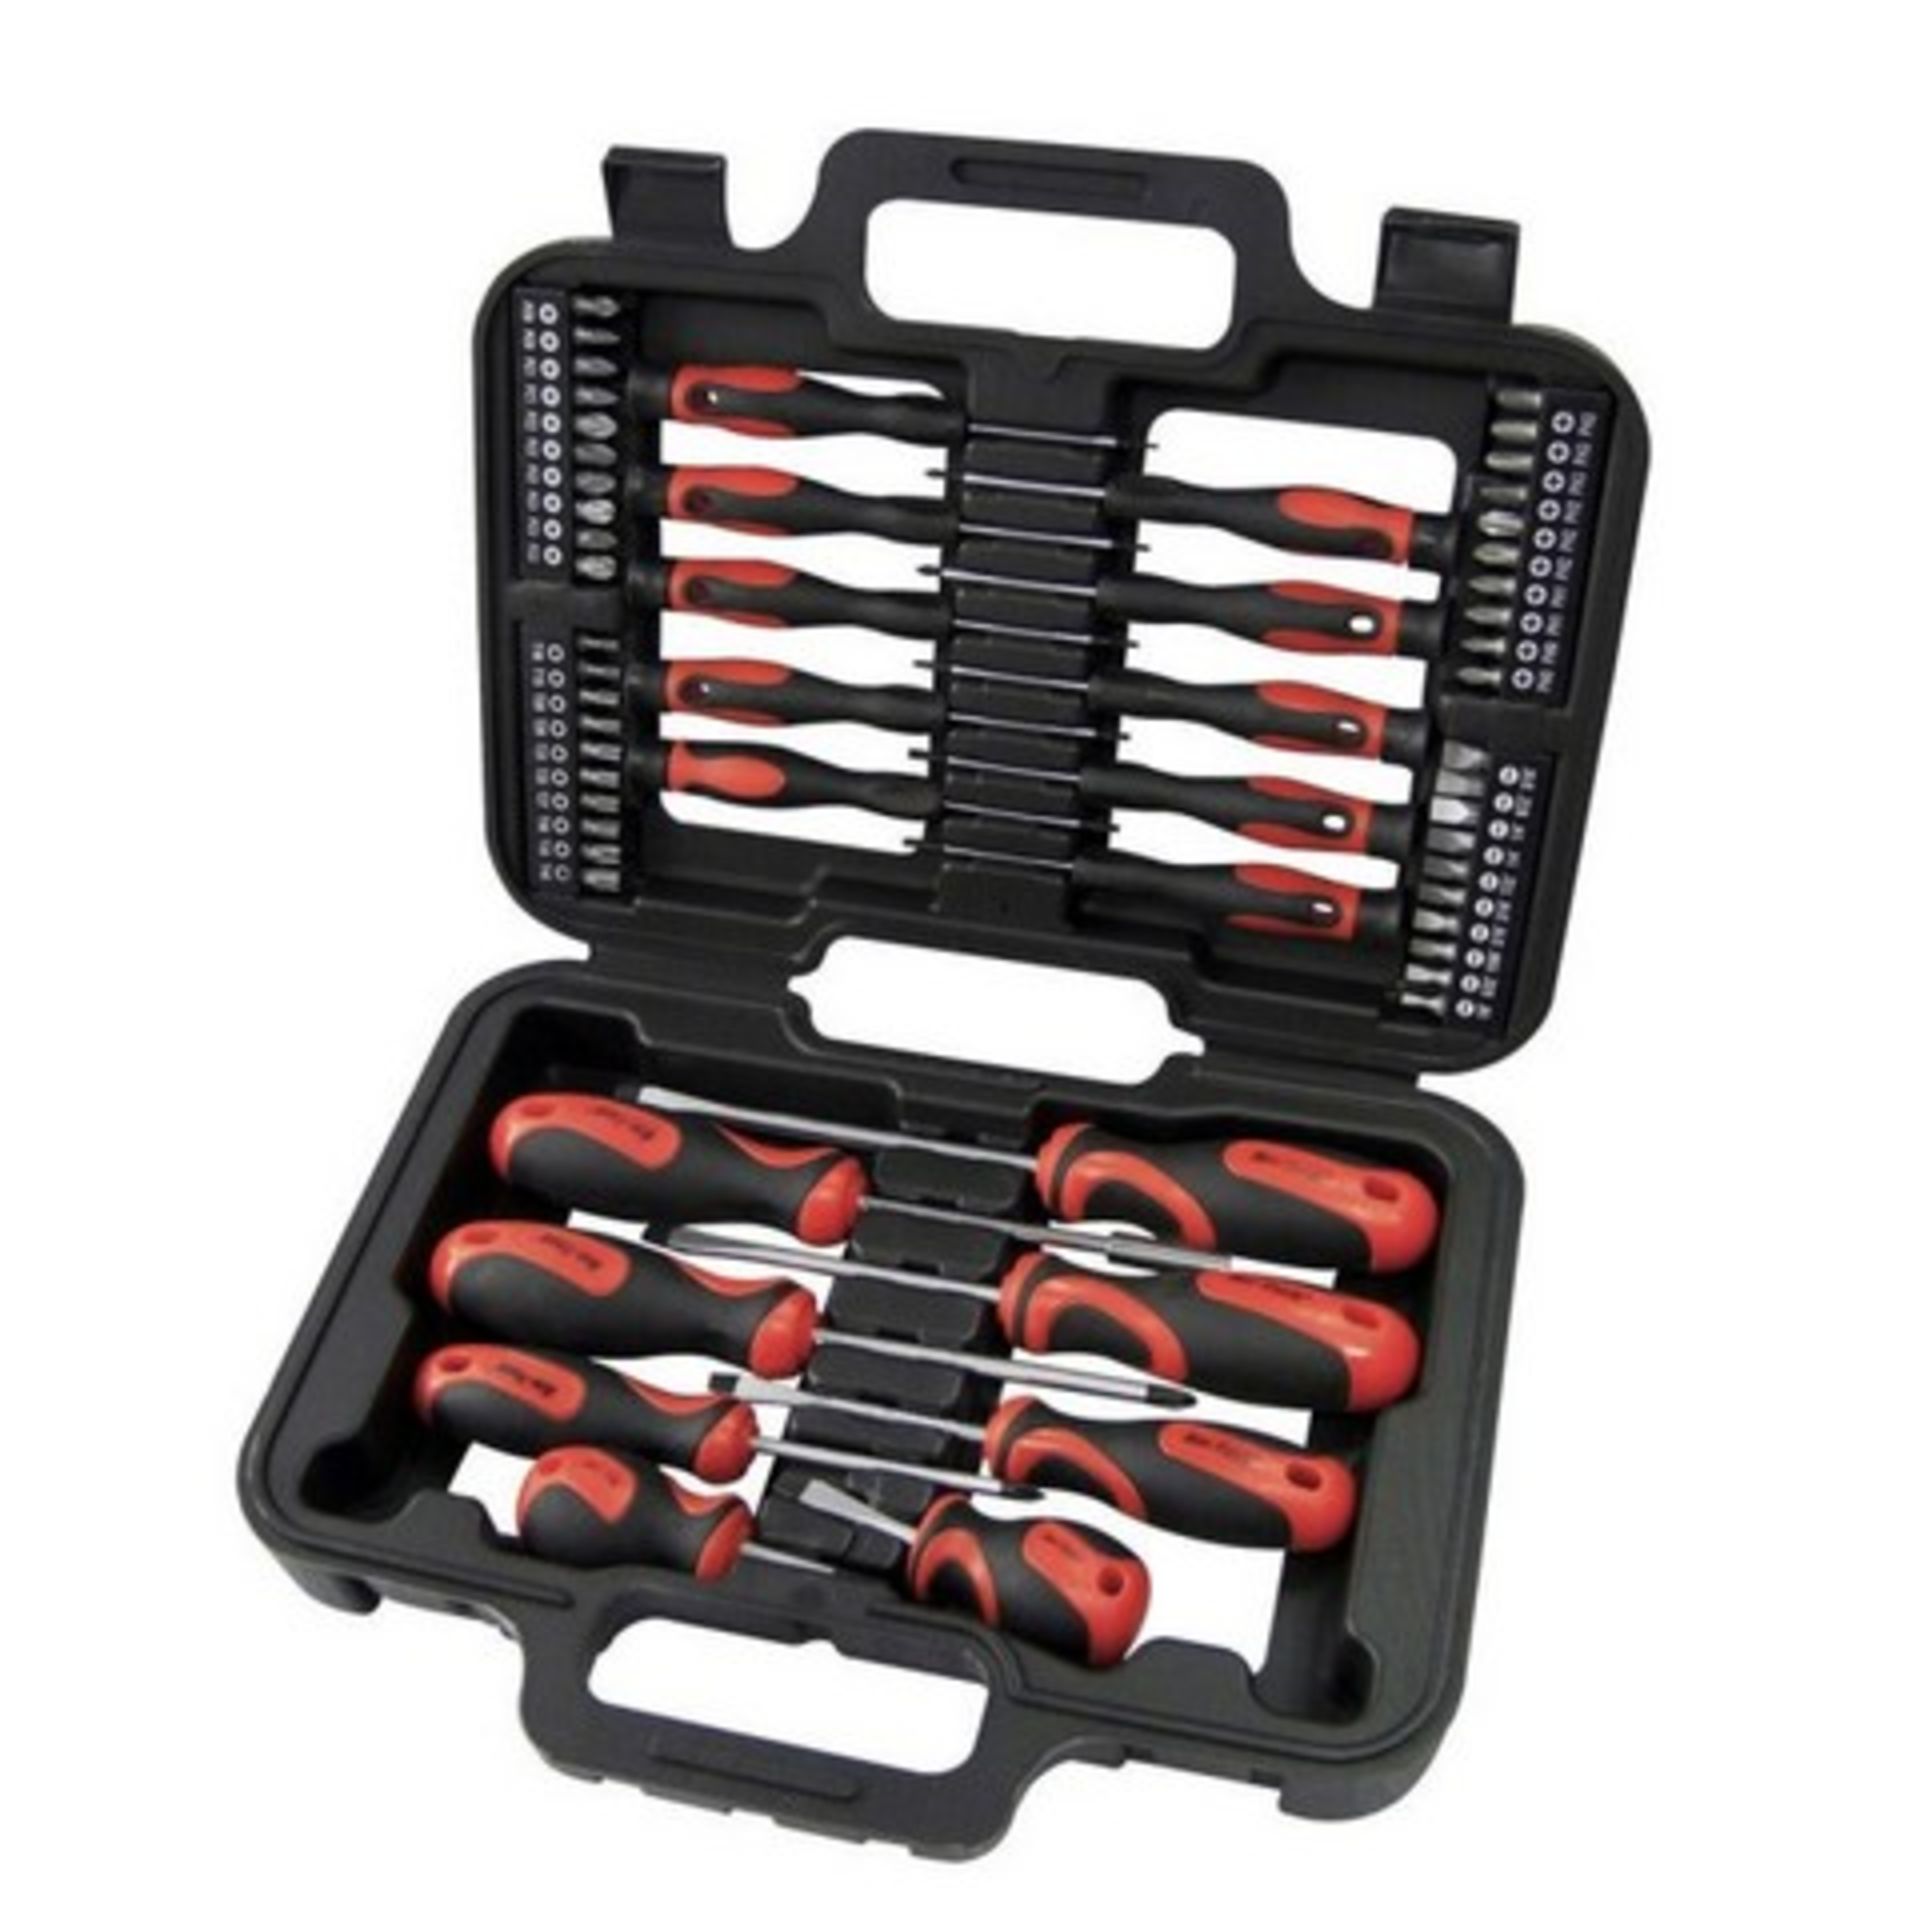 V Brand New 58 Piece Screwdriver And Bit Set In Carry Case